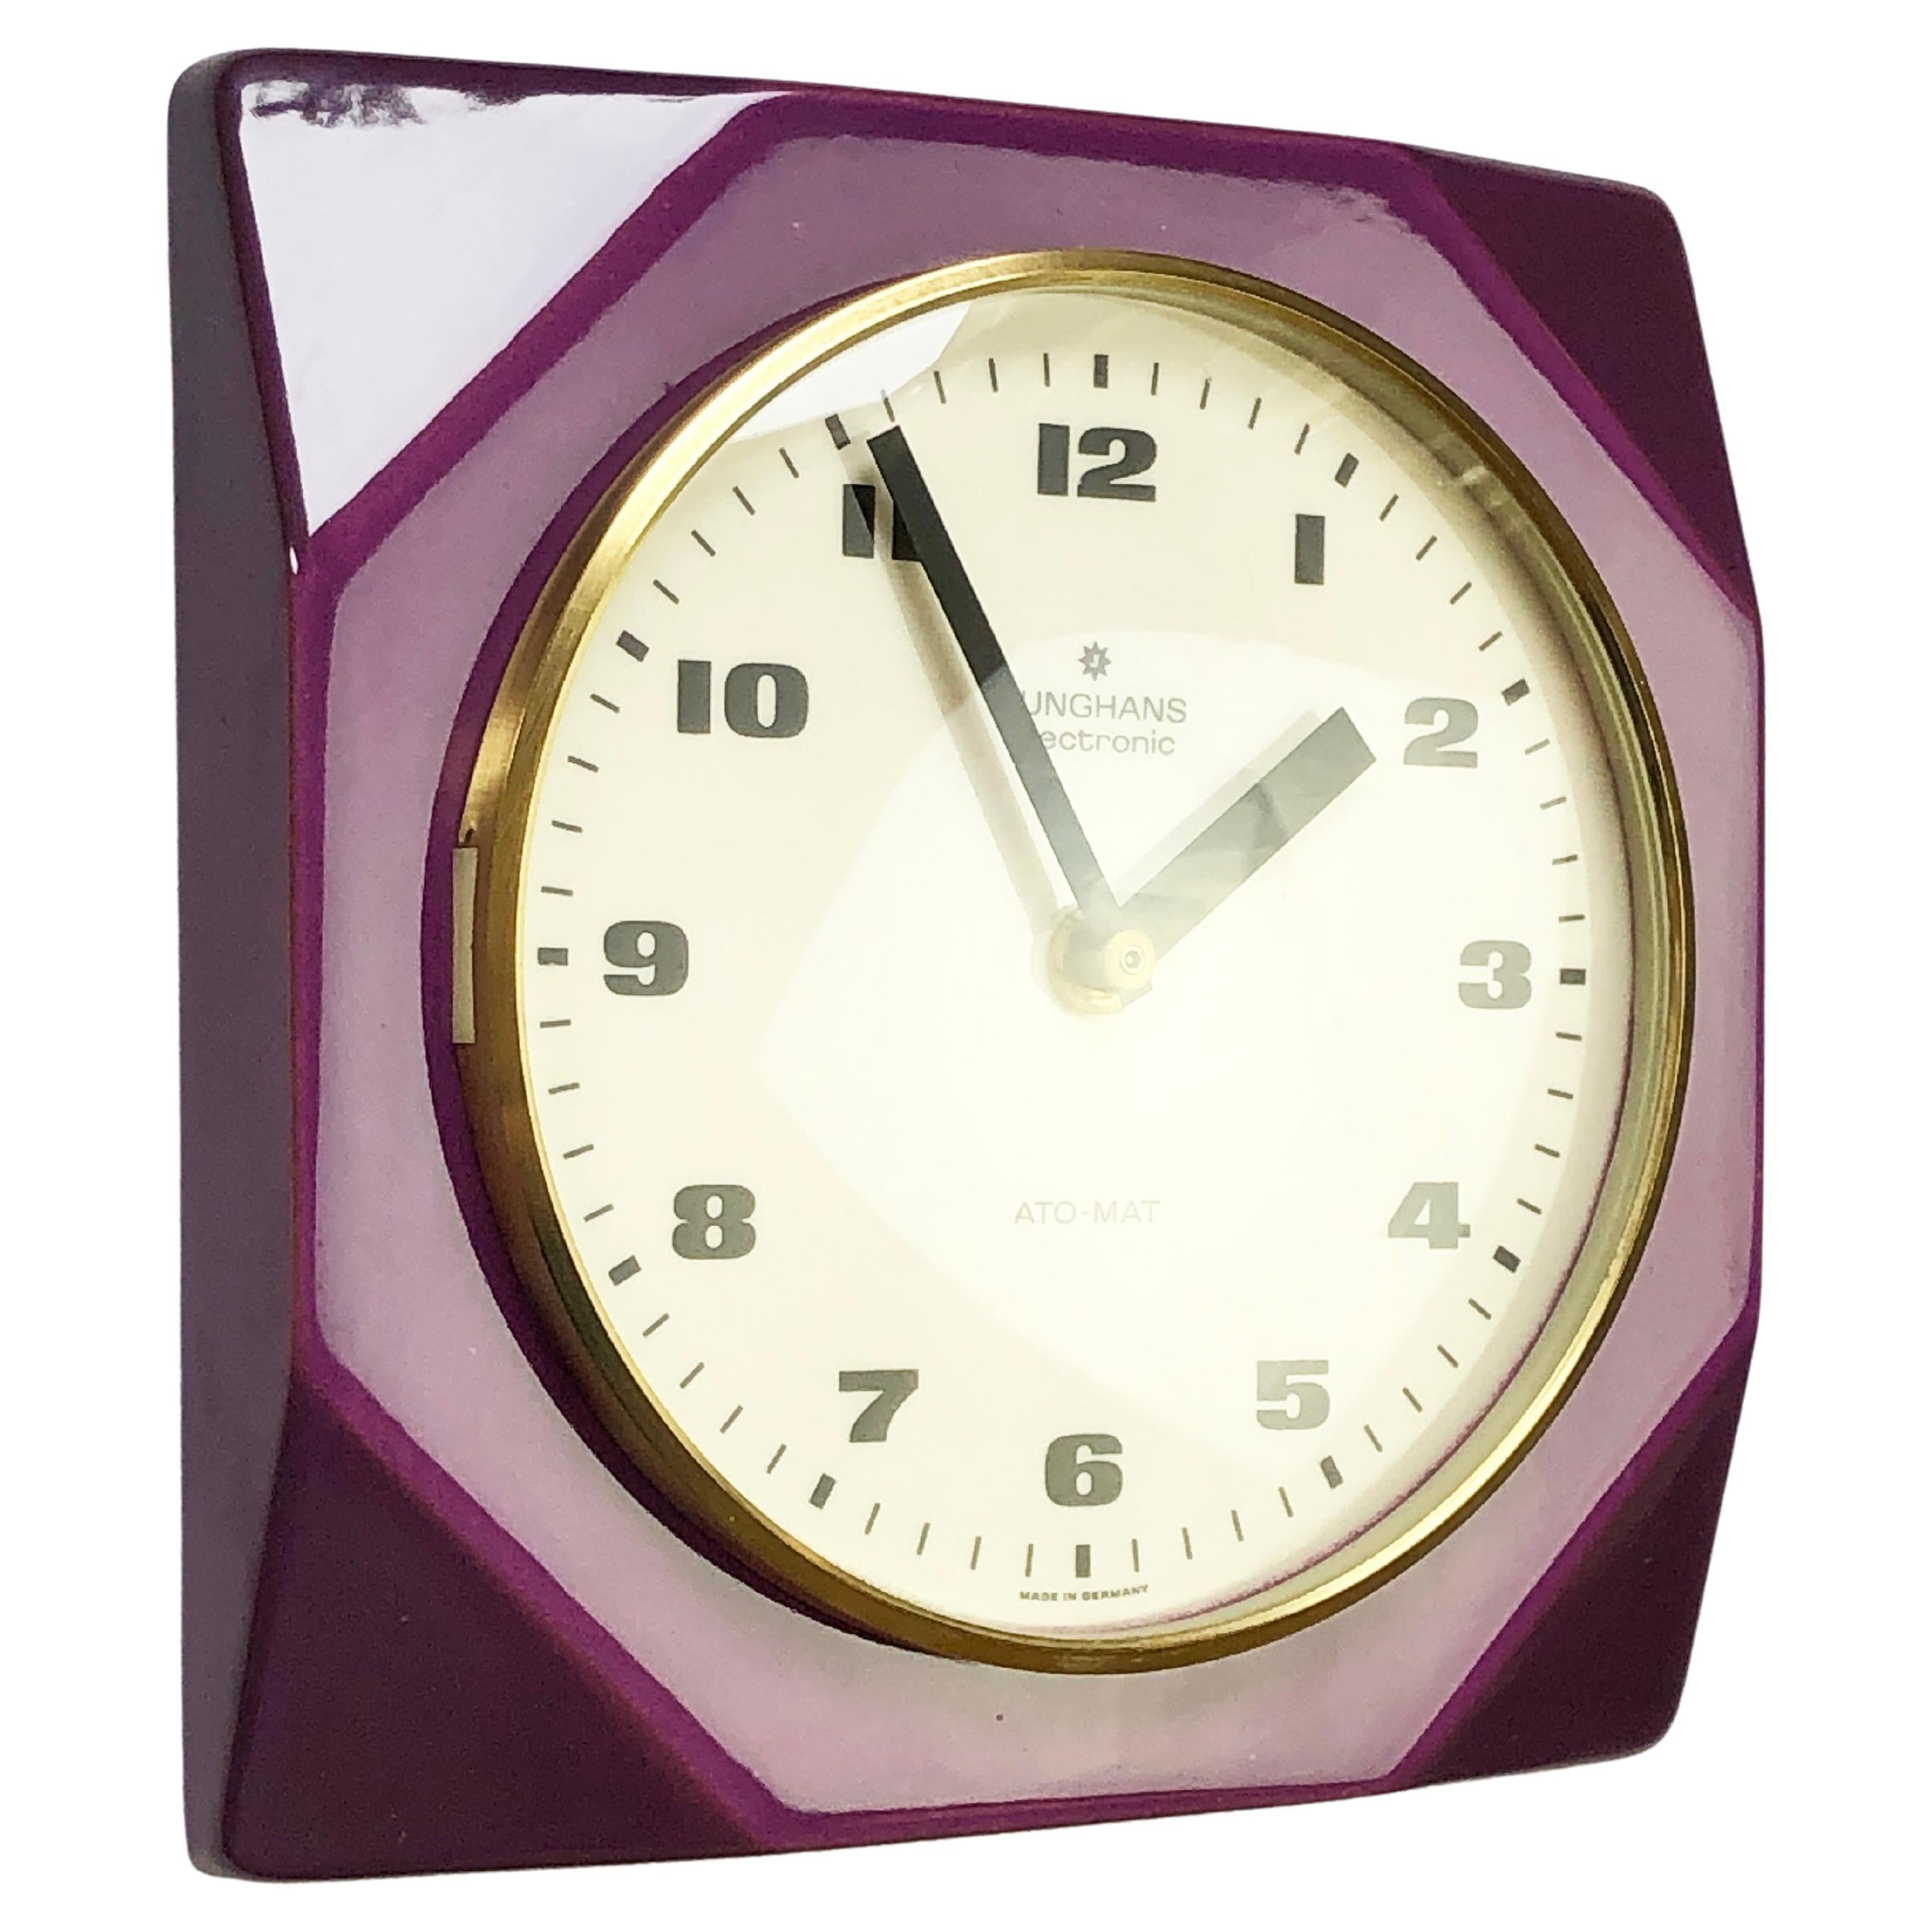 Outstanding colours & design by the famous German watch- and clock maker JUNGHANS.
Quite a futuristic approach, a masterpiece of mid-century design.
Made in the late 50s to 60s, this wall clock is made from a mid purple, glazed ceramic.
Geometrical